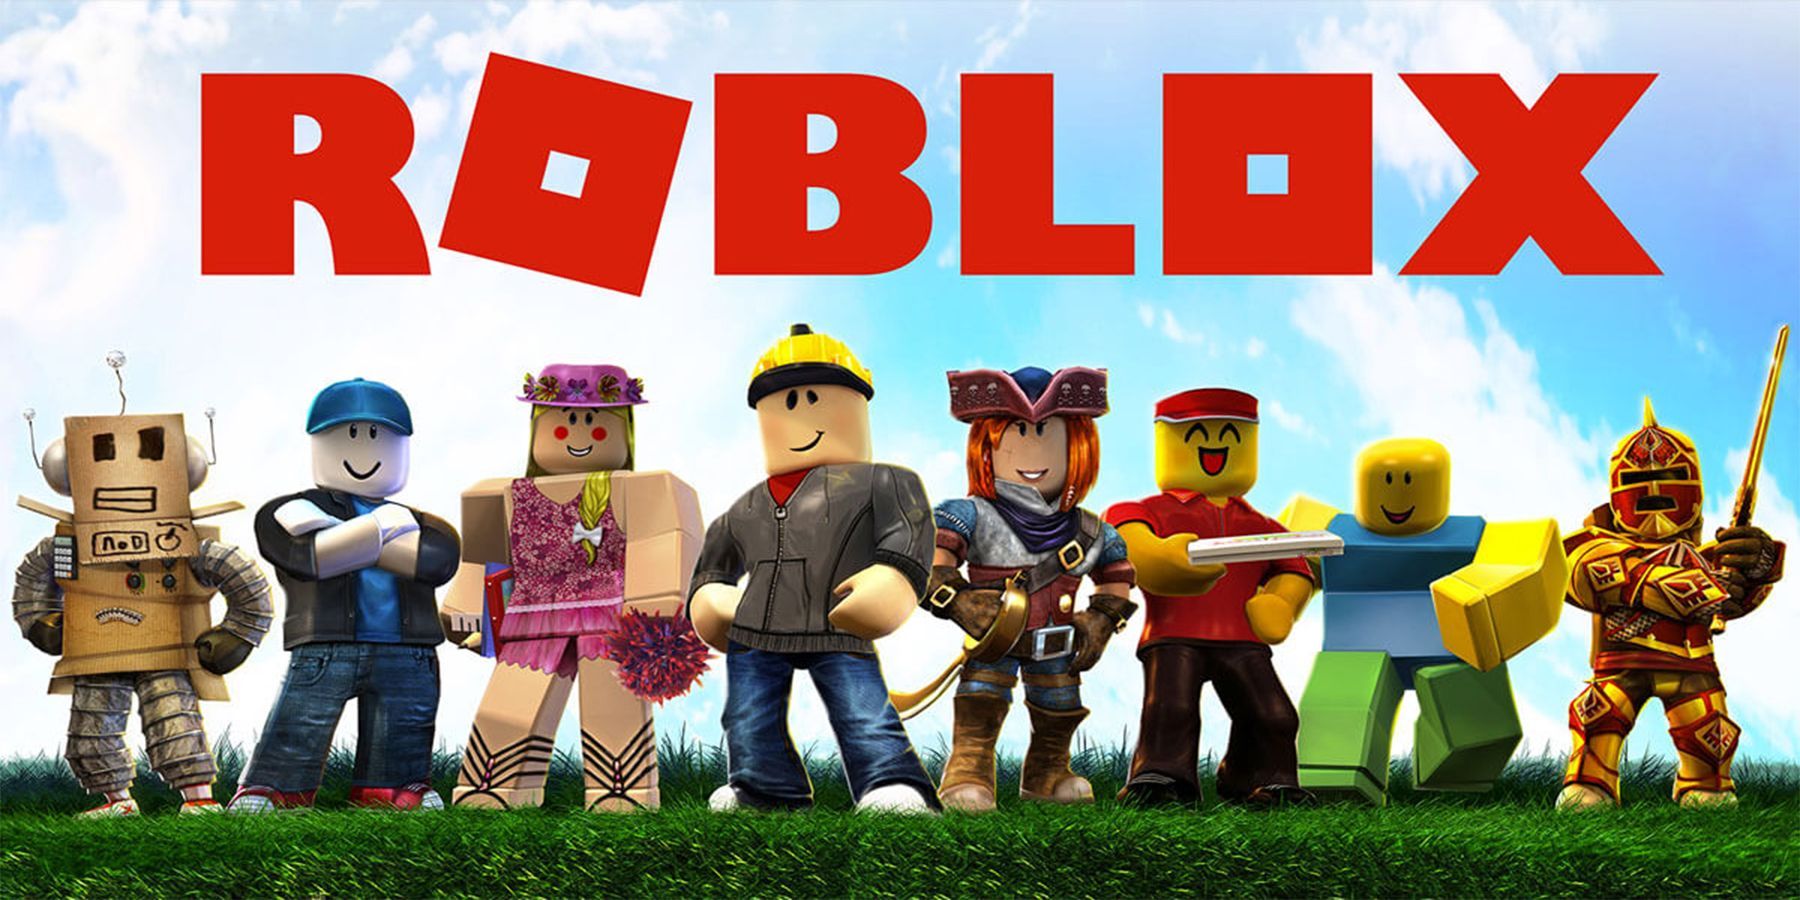 roblox characters standing together